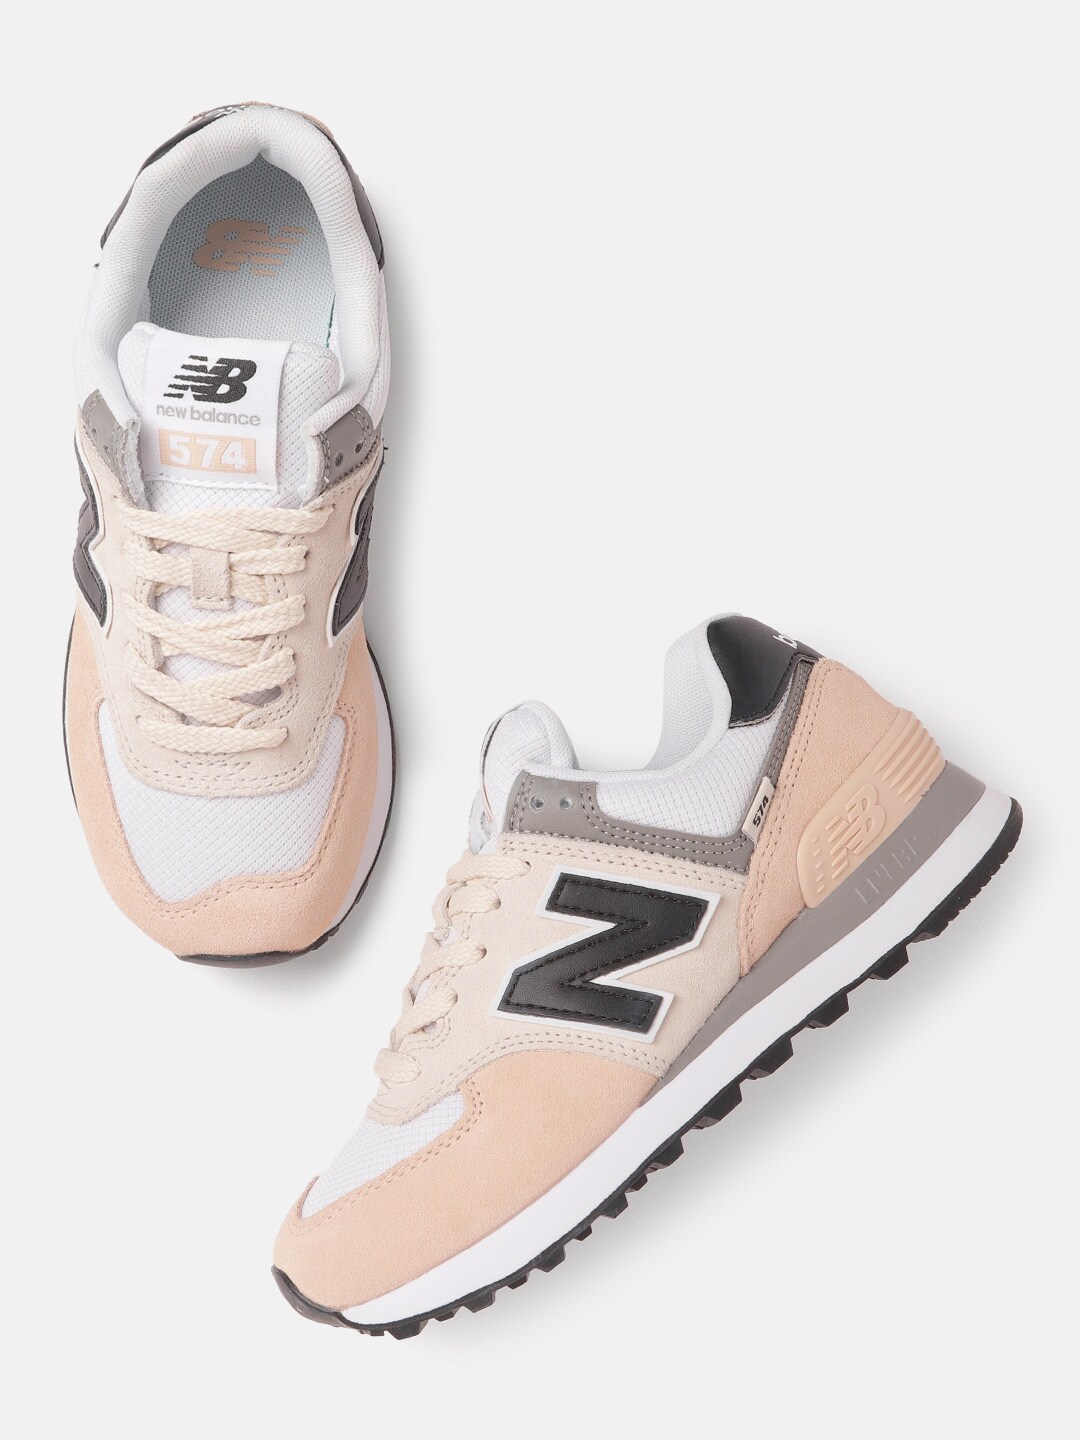 New Balance Women Pink Solid Sneakers Price in India